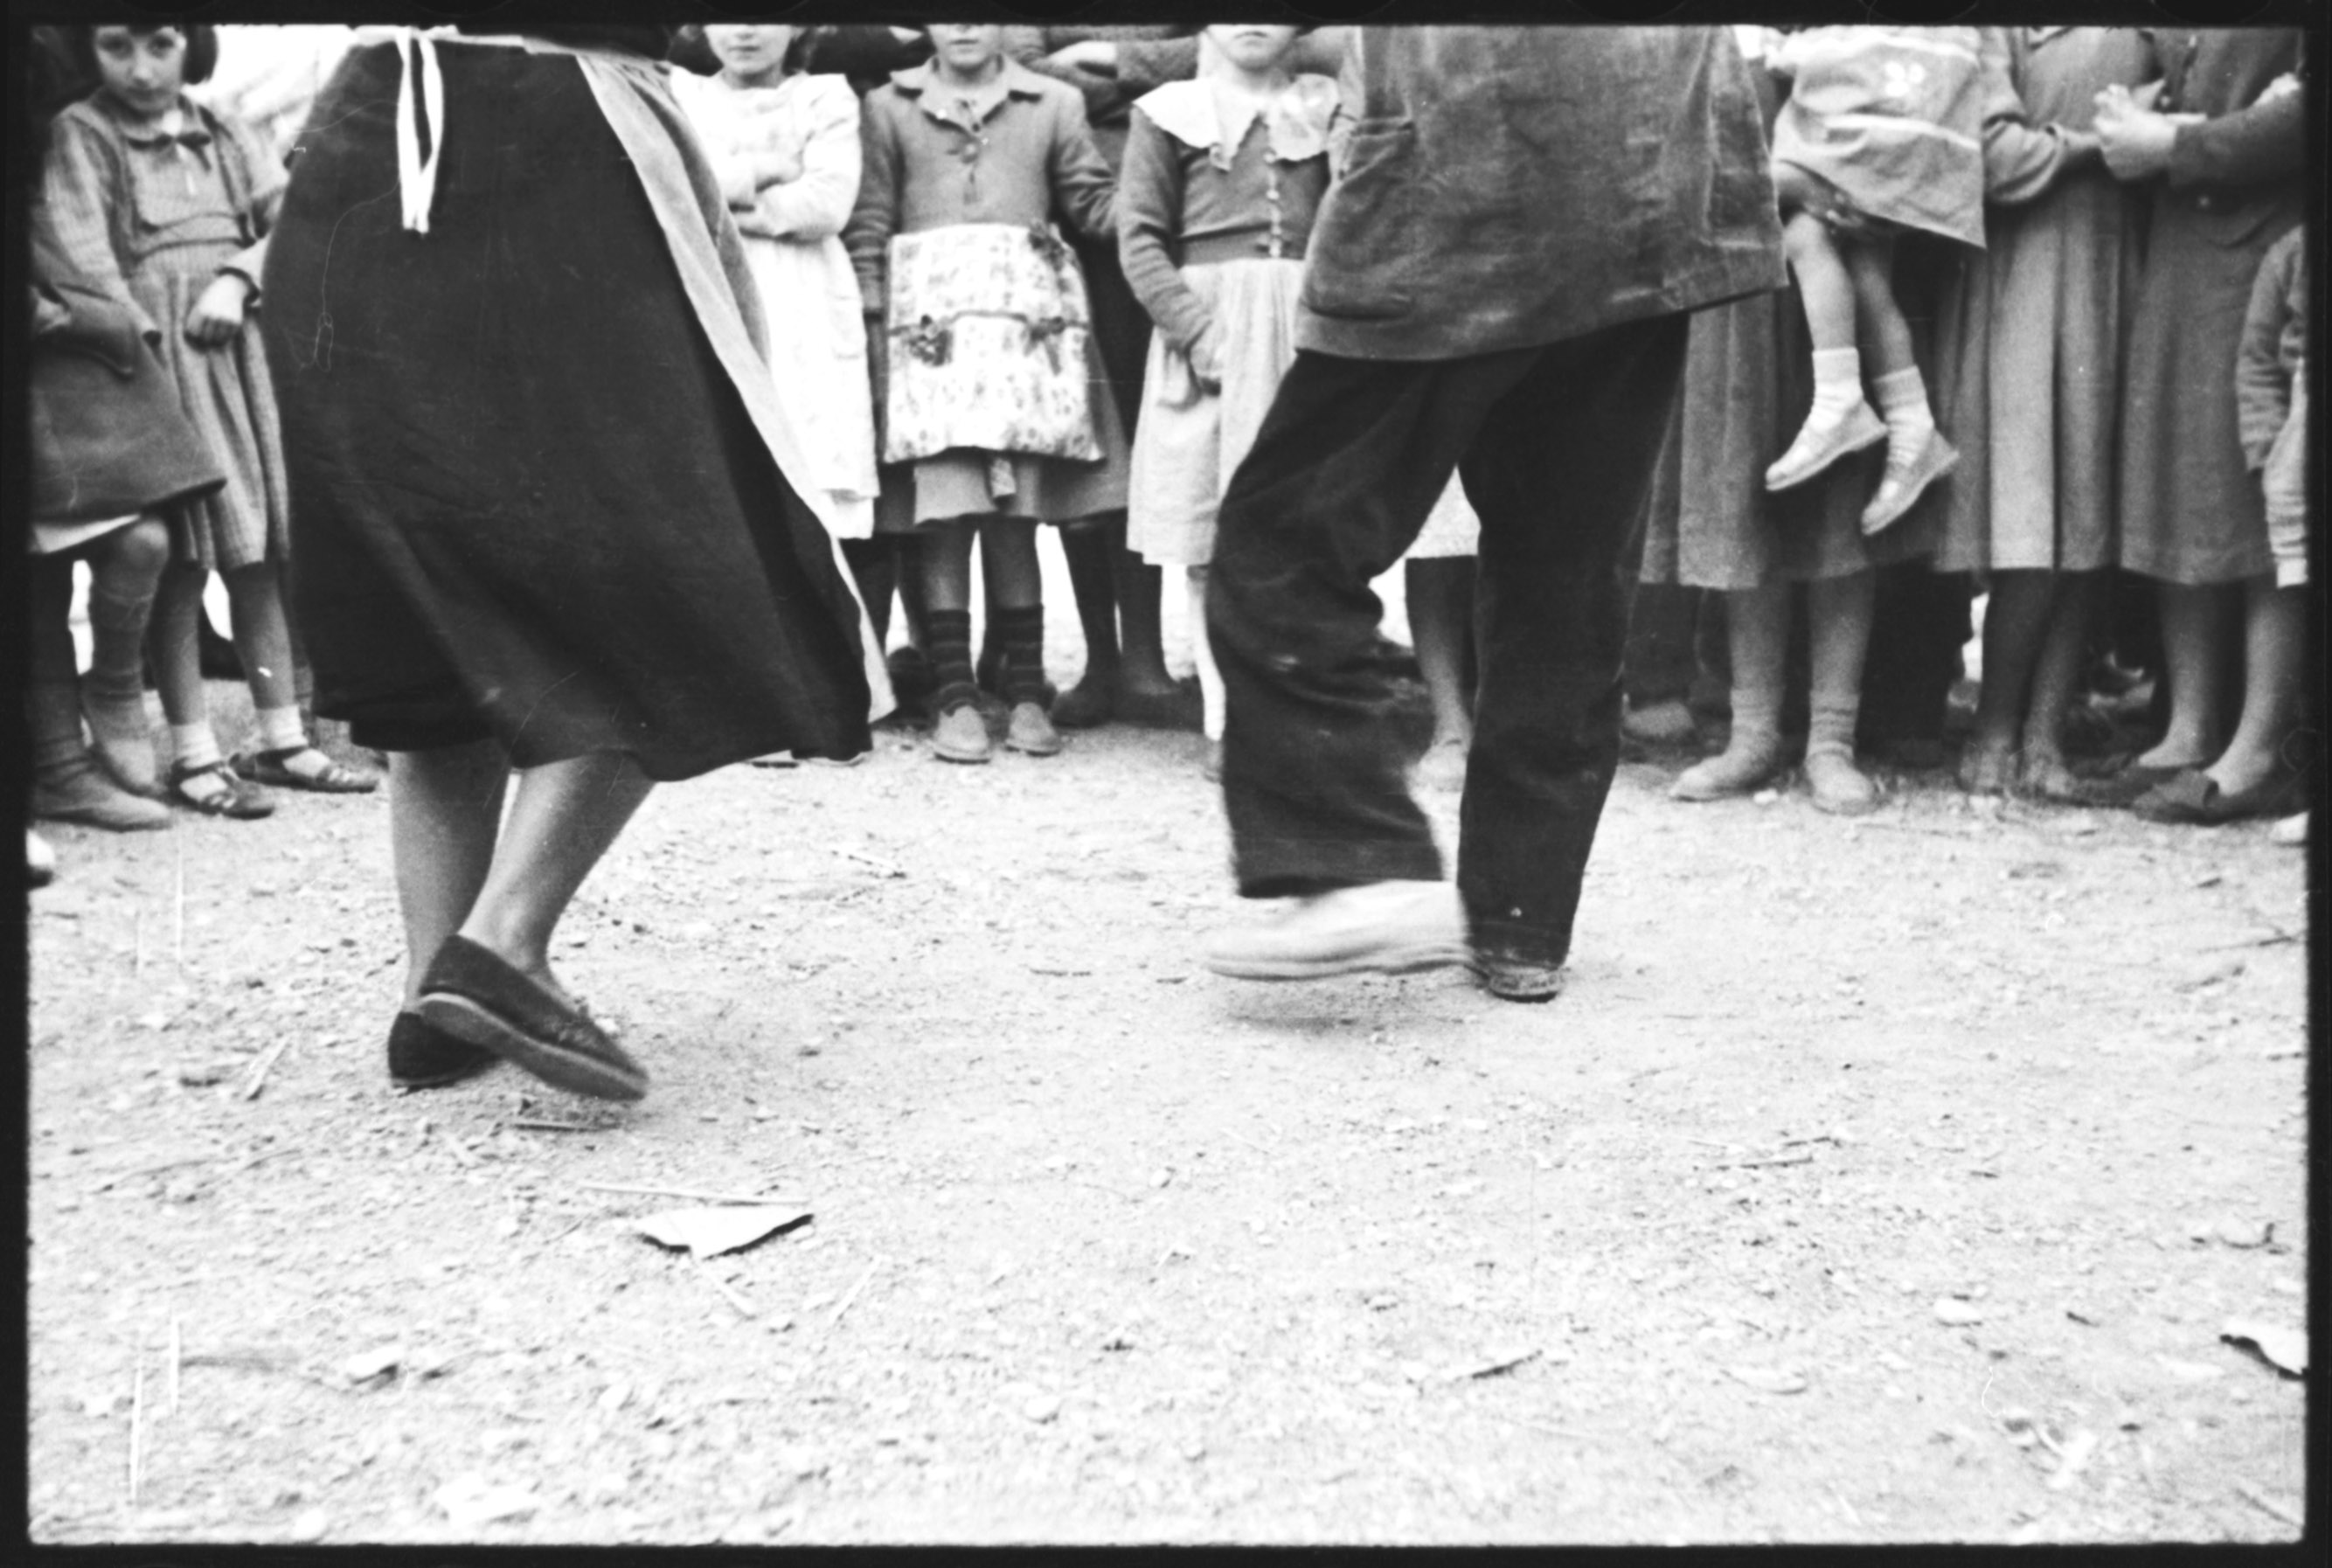 "Sevillana dancers in town square," From the Alan Lomax Collection at the American Folklife Center, Library of Congress. Used courtesy of the Association for Cultural Equity.